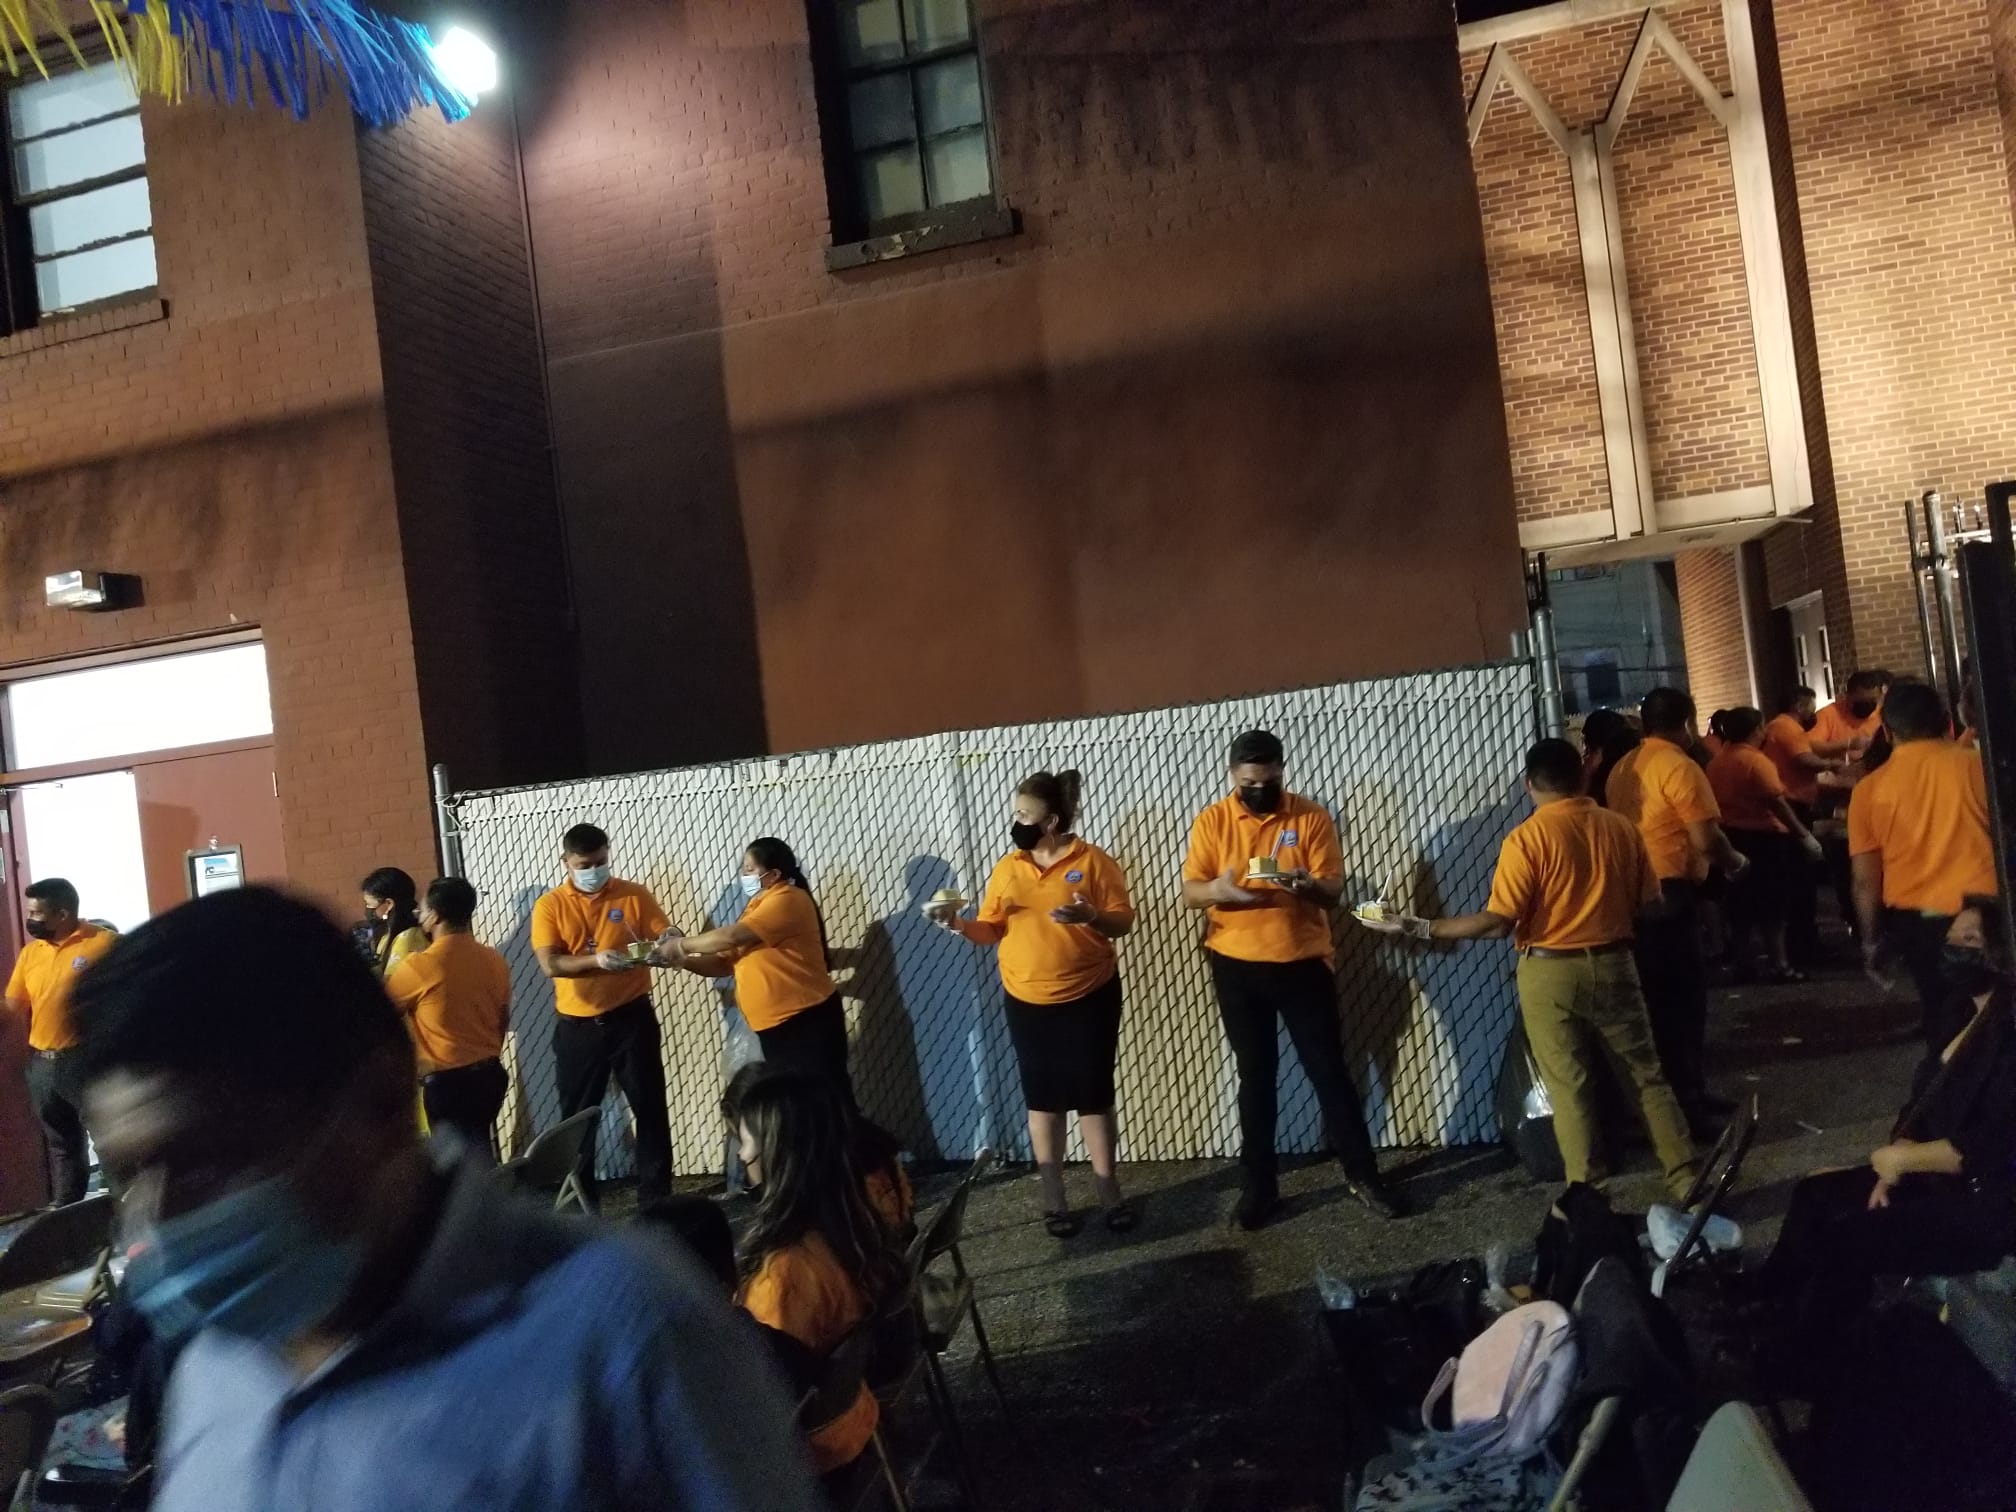 A group of people in yellow shirts standing on the side of a building.